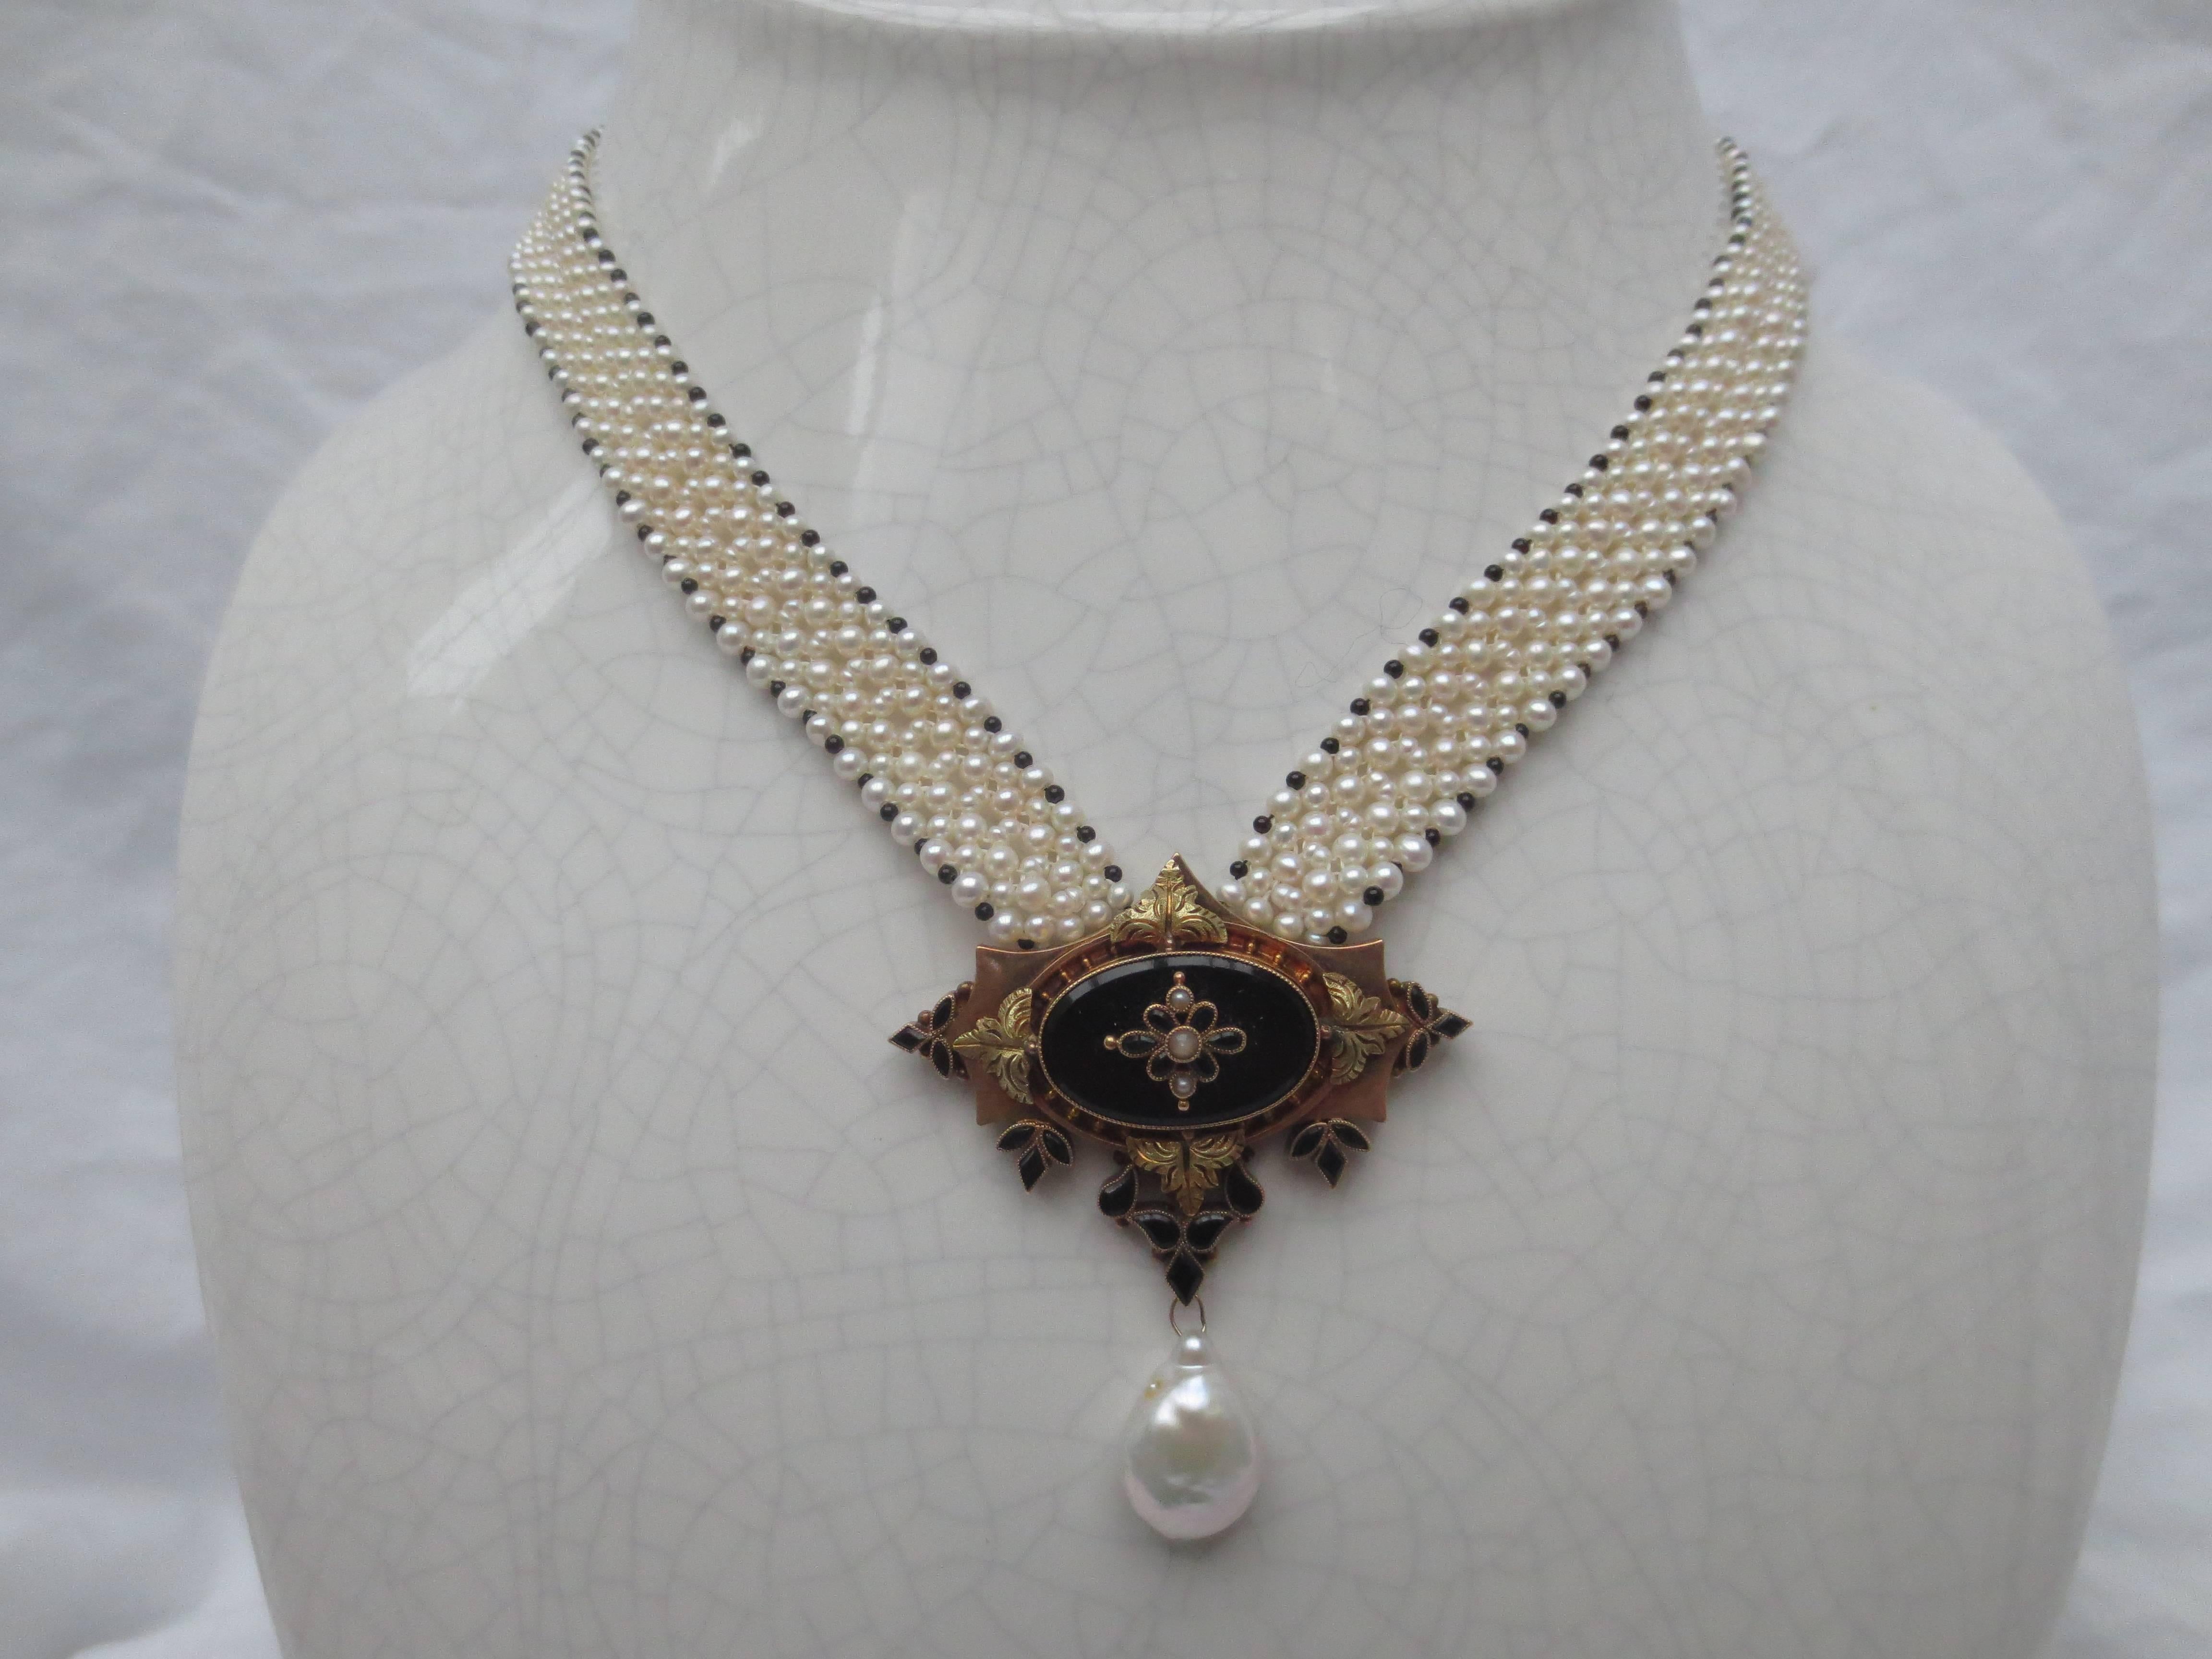 Woven Multi-Strand Pearl and Onyx Necklace with Antique Victorian Centerpiece 5